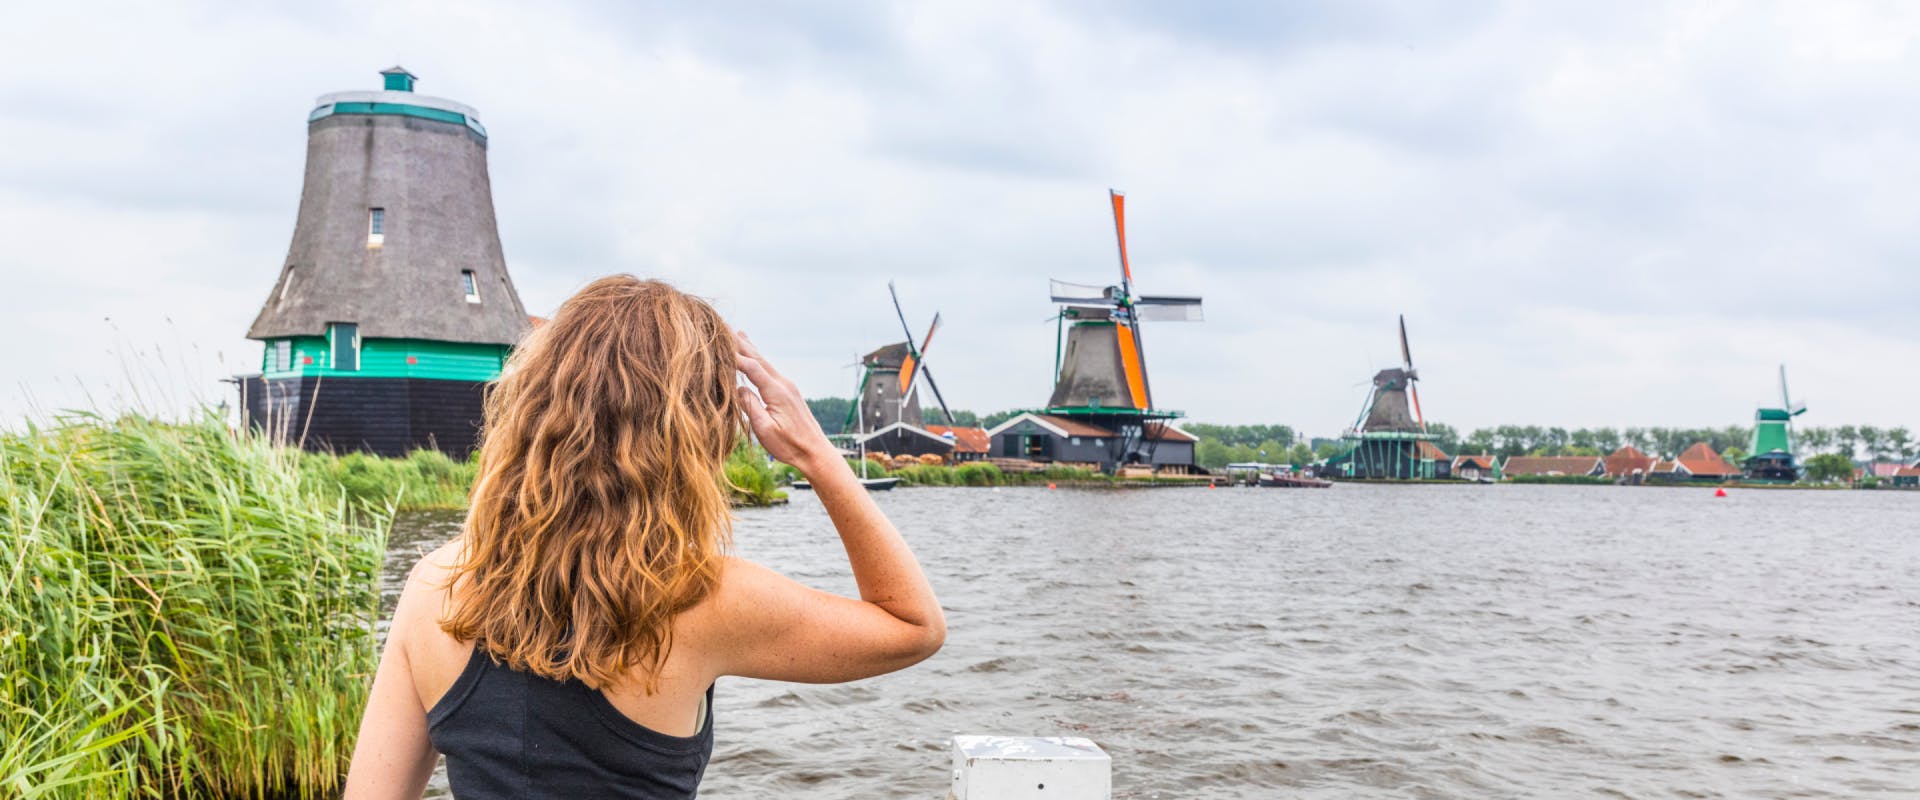 A woman looks at windmills in the Netherlands.